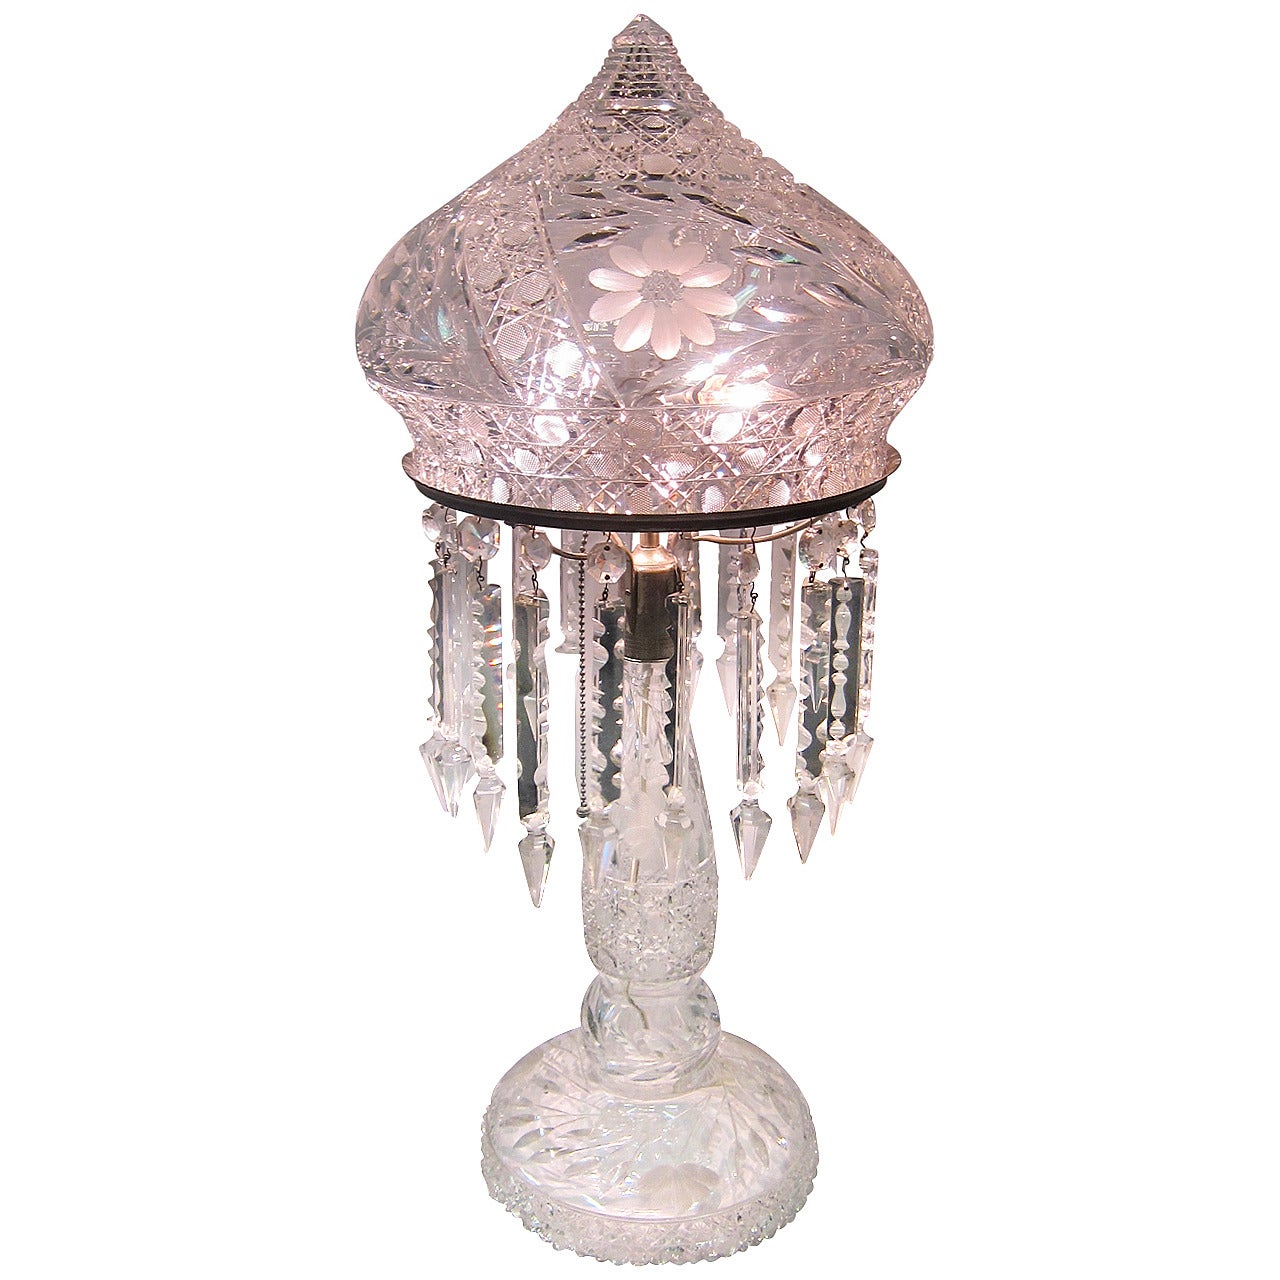 Vintage (early 20th century) American cut glass table lamp For Sale